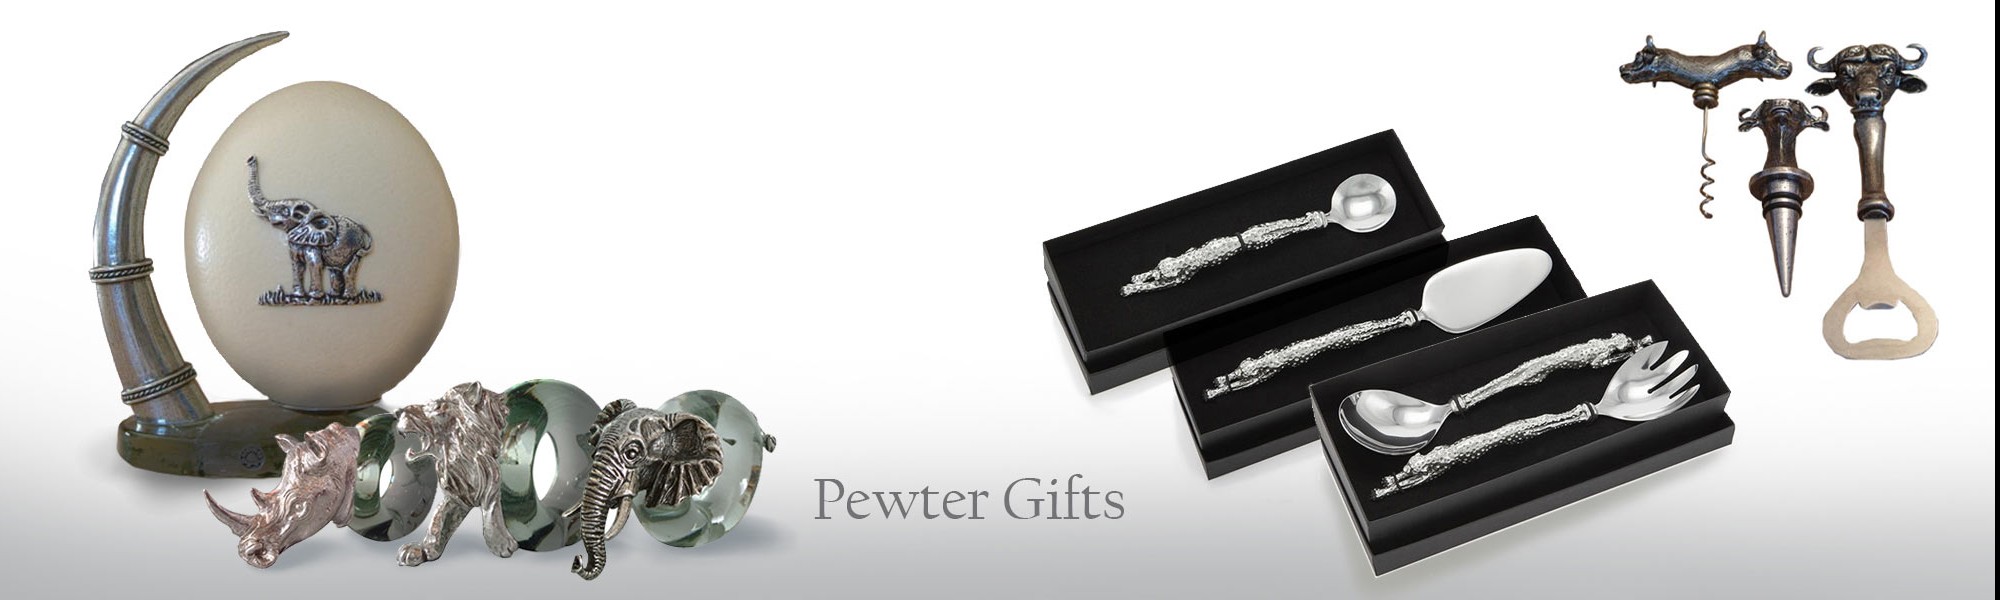 Pewter Gifts